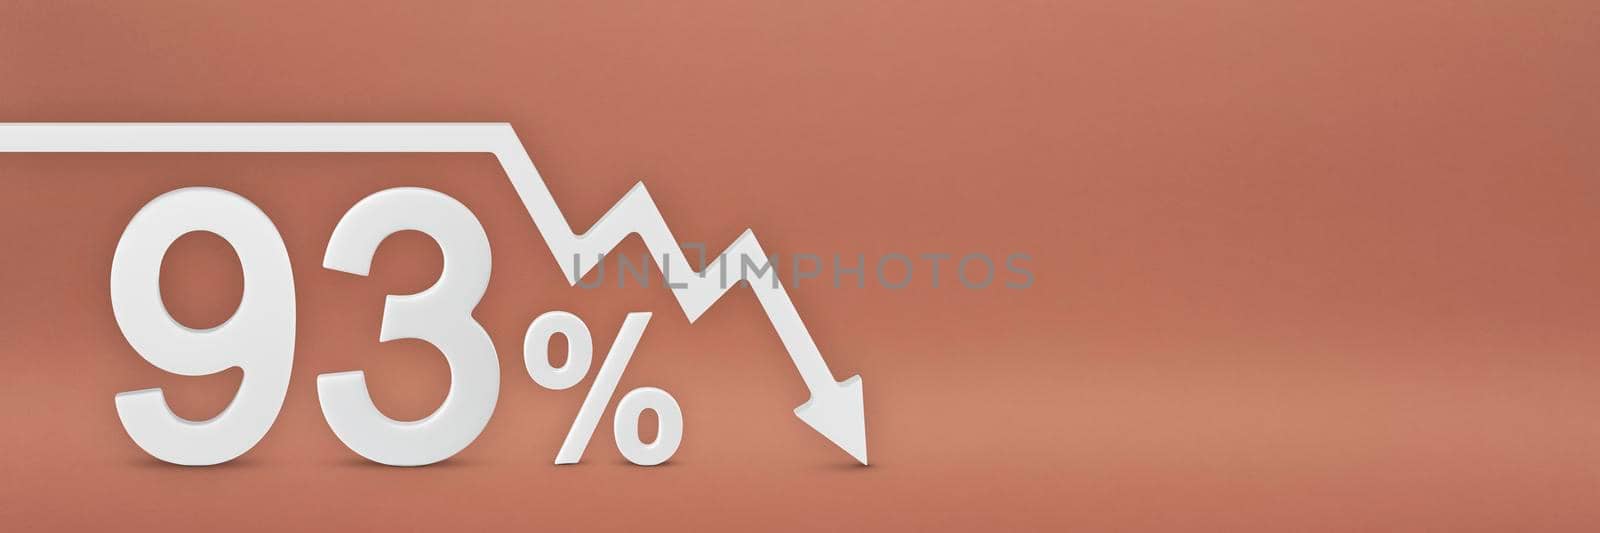 ninety-three percent, the arrow on the graph is pointing down. Stock market crash, bear market, inflation.Economic collapse, collapse of stocks.3d banner,93 percent discount sign on a red background. by SERSOL